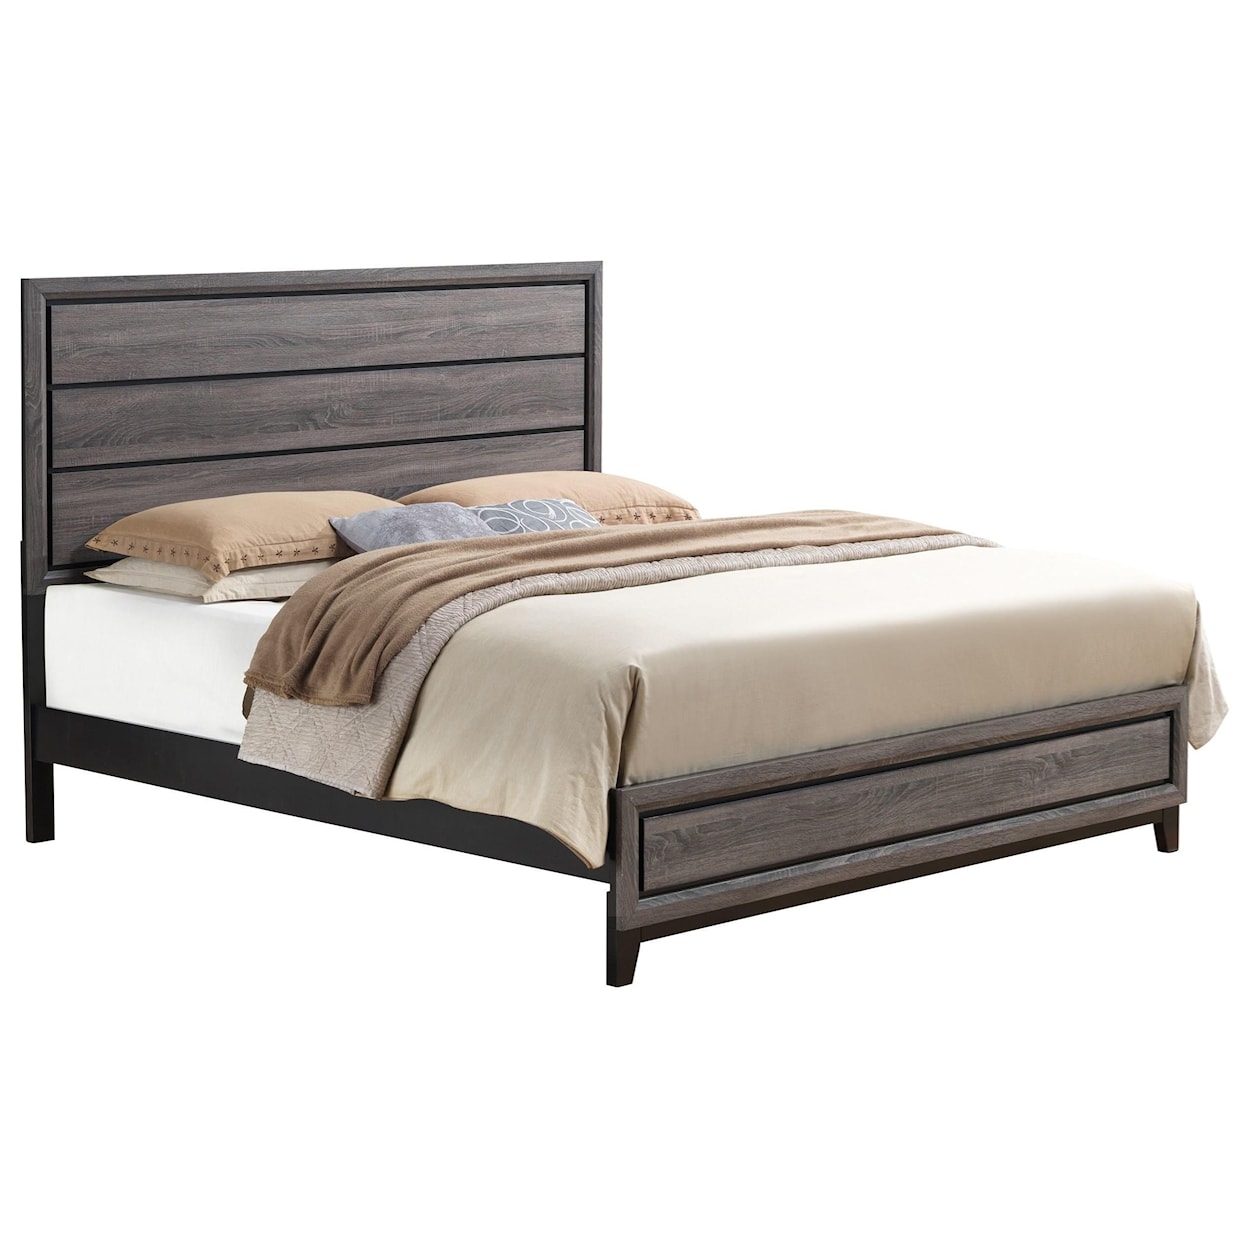 Global Furniture Kate Queen Bed